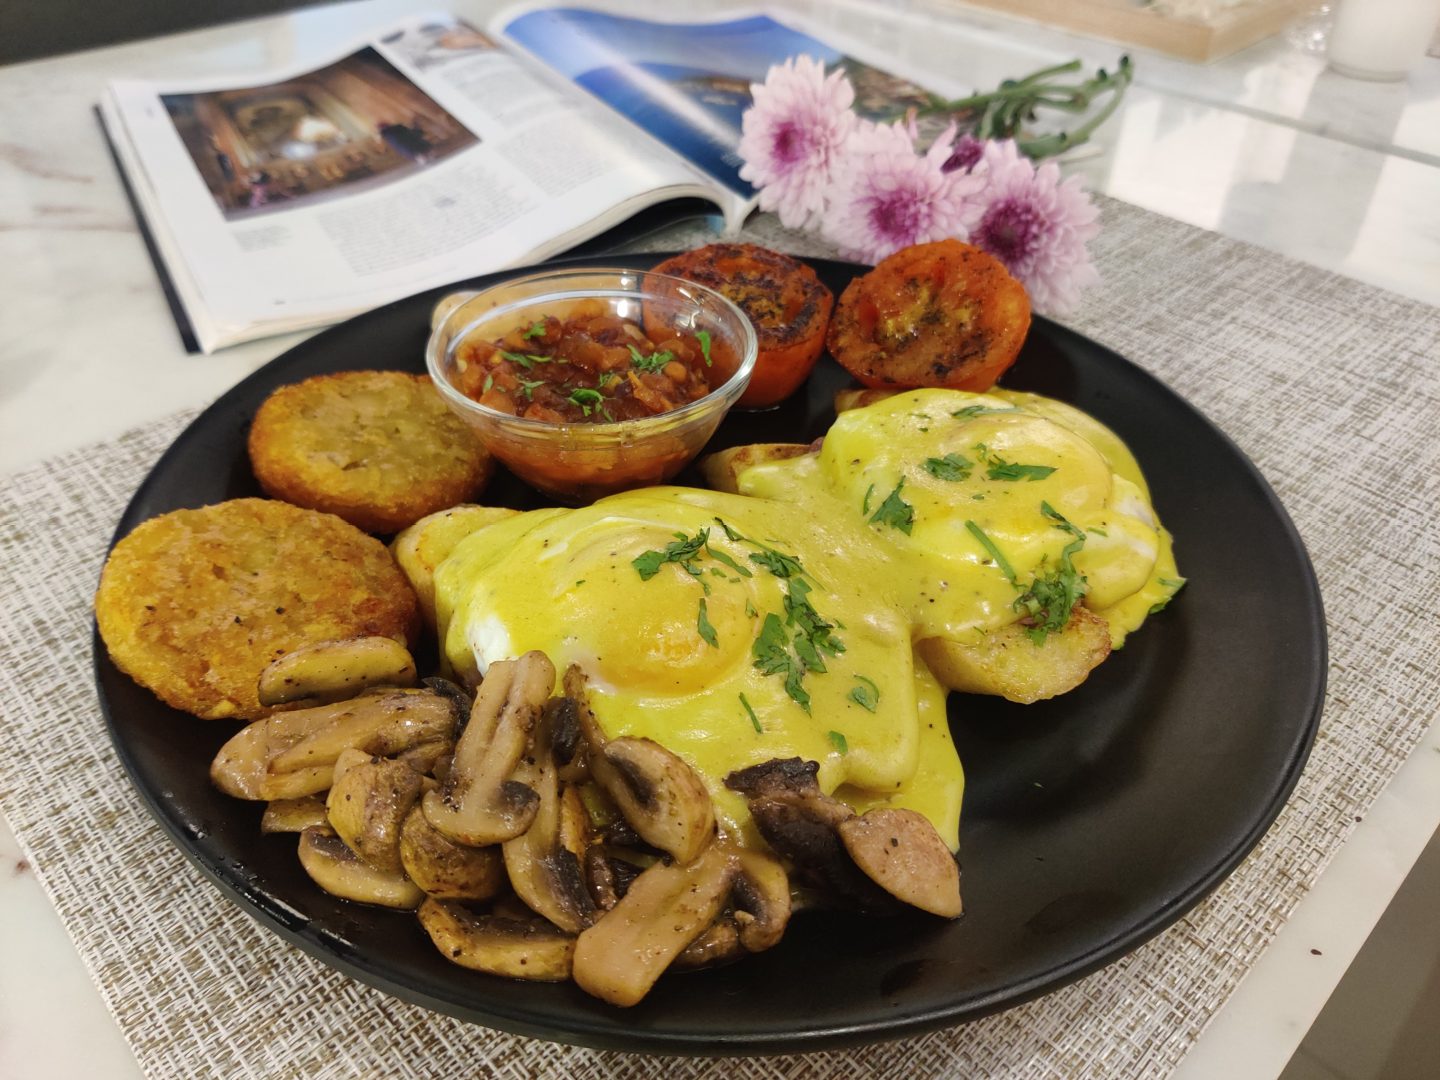 Head to The Sugar Flower to enjoy all-day breakfasts in Panjim